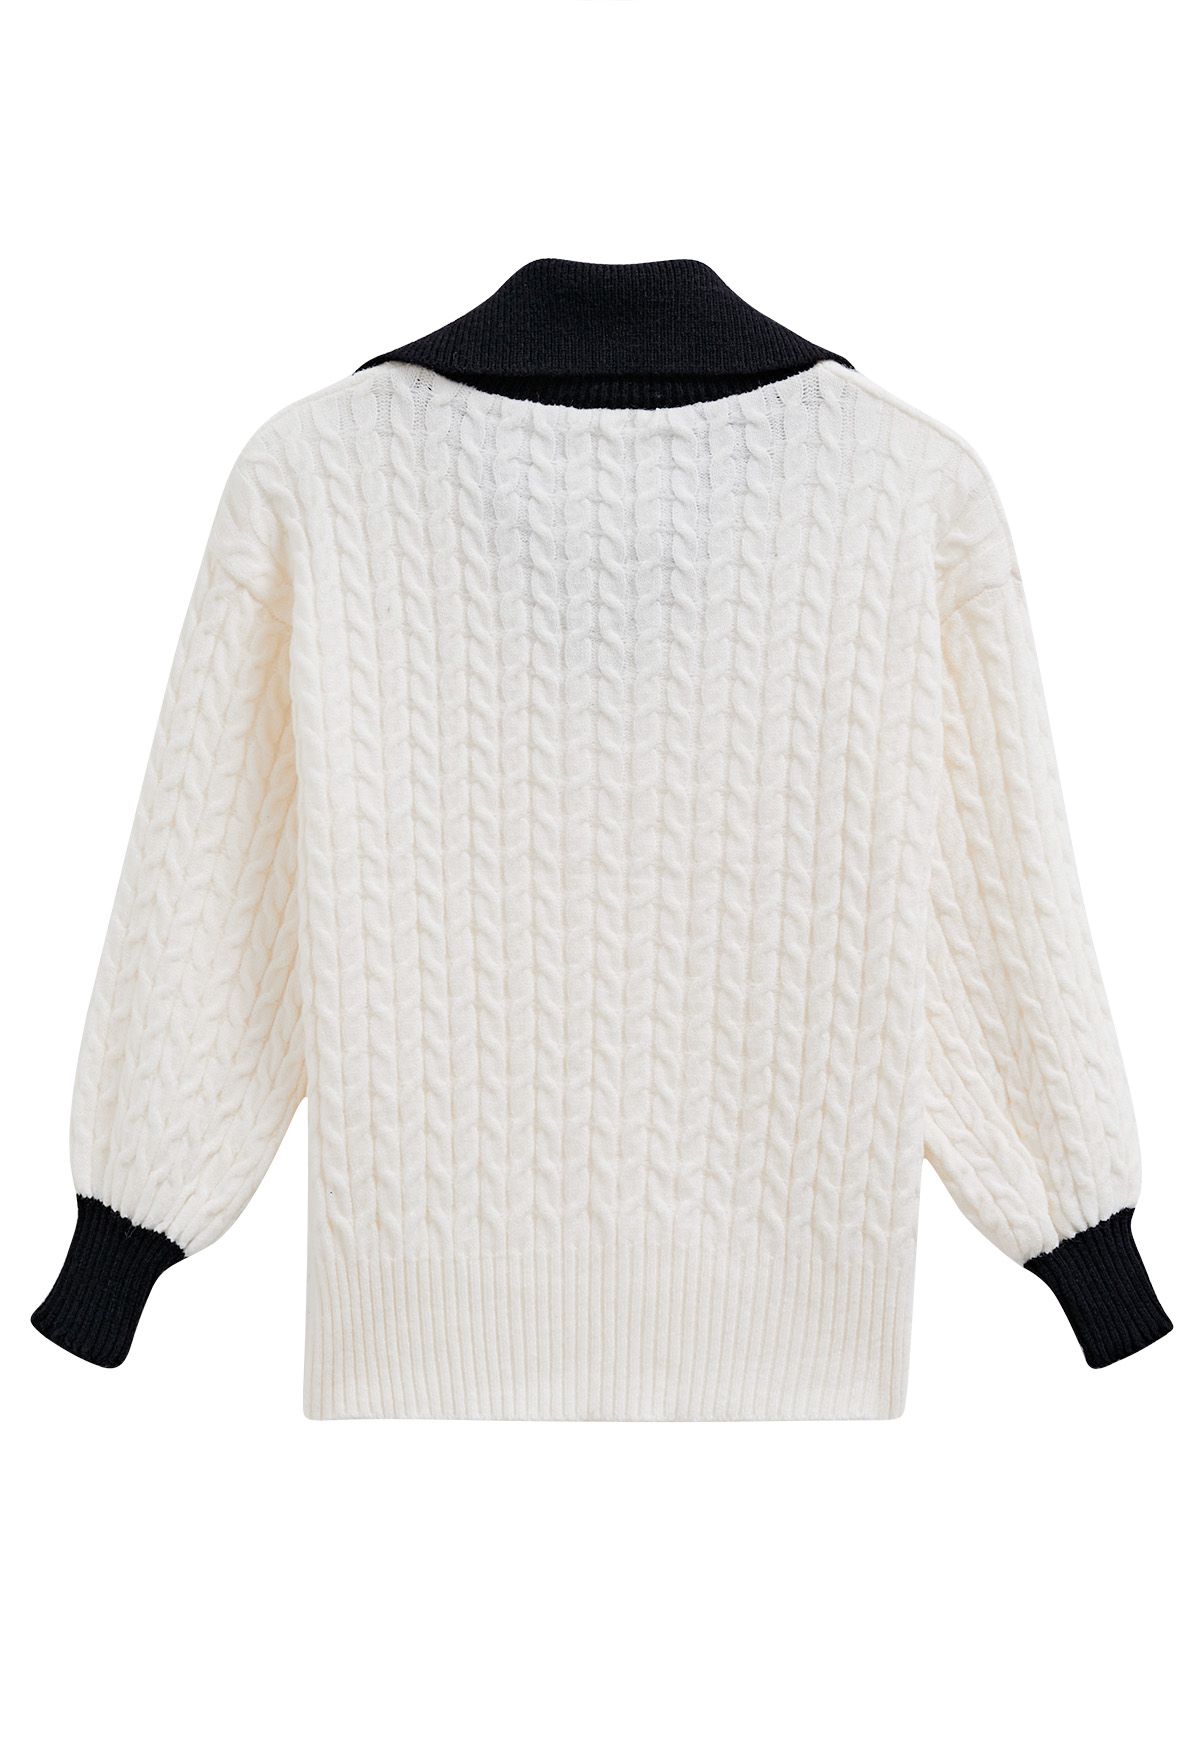 Contrast Flap Collar Cable Knit Sweater in Ivory